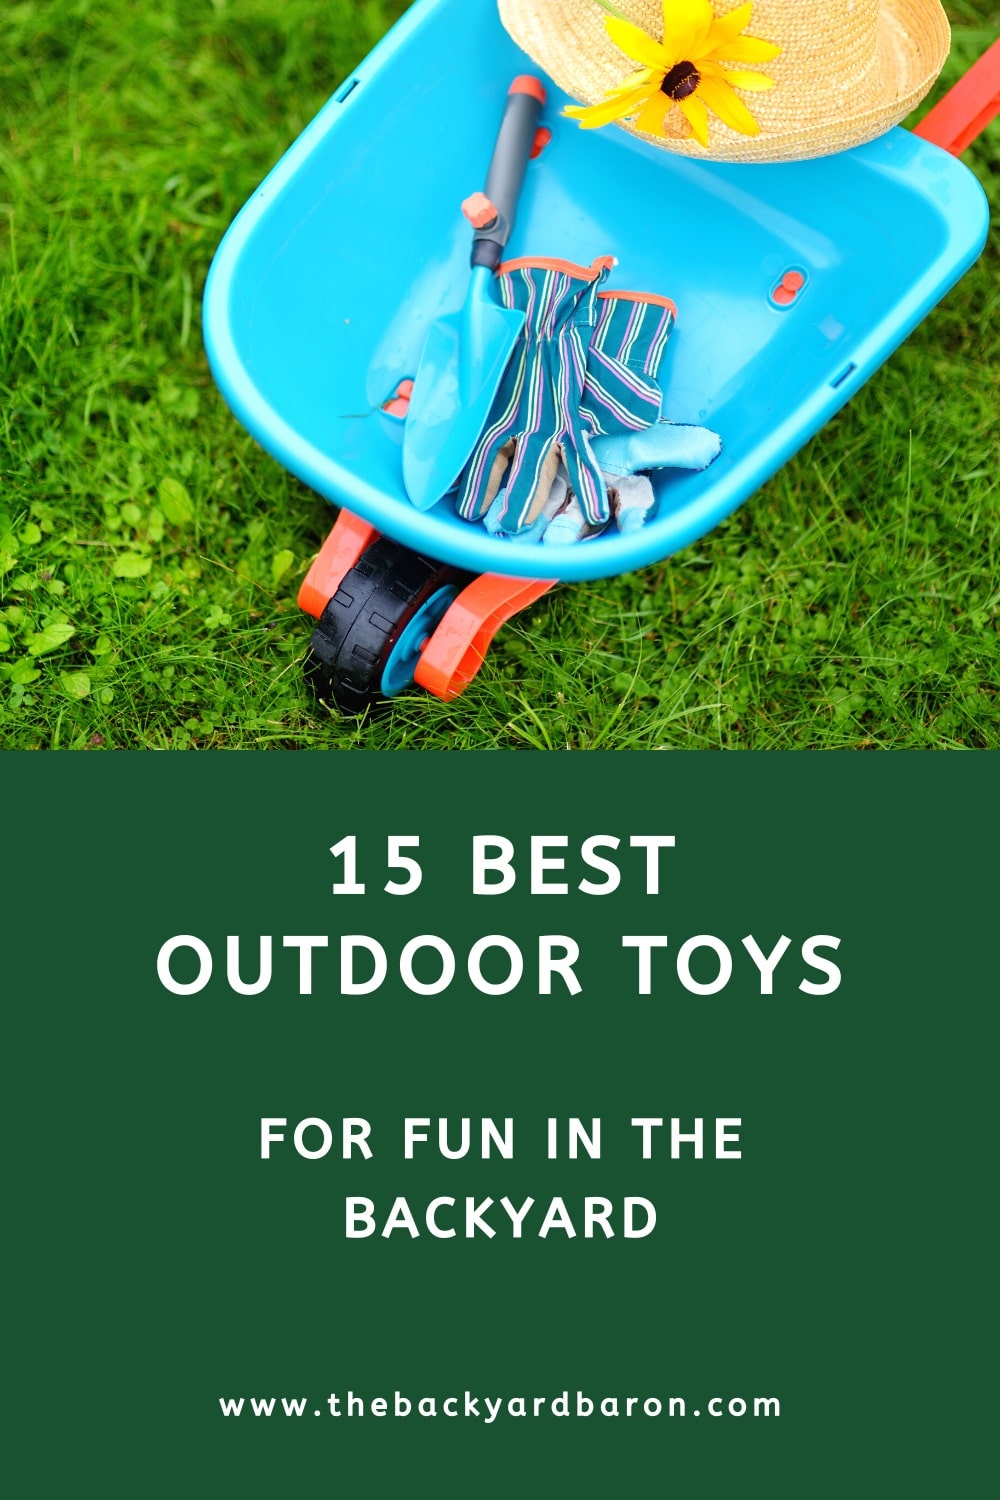 15 Best toys for the backyard